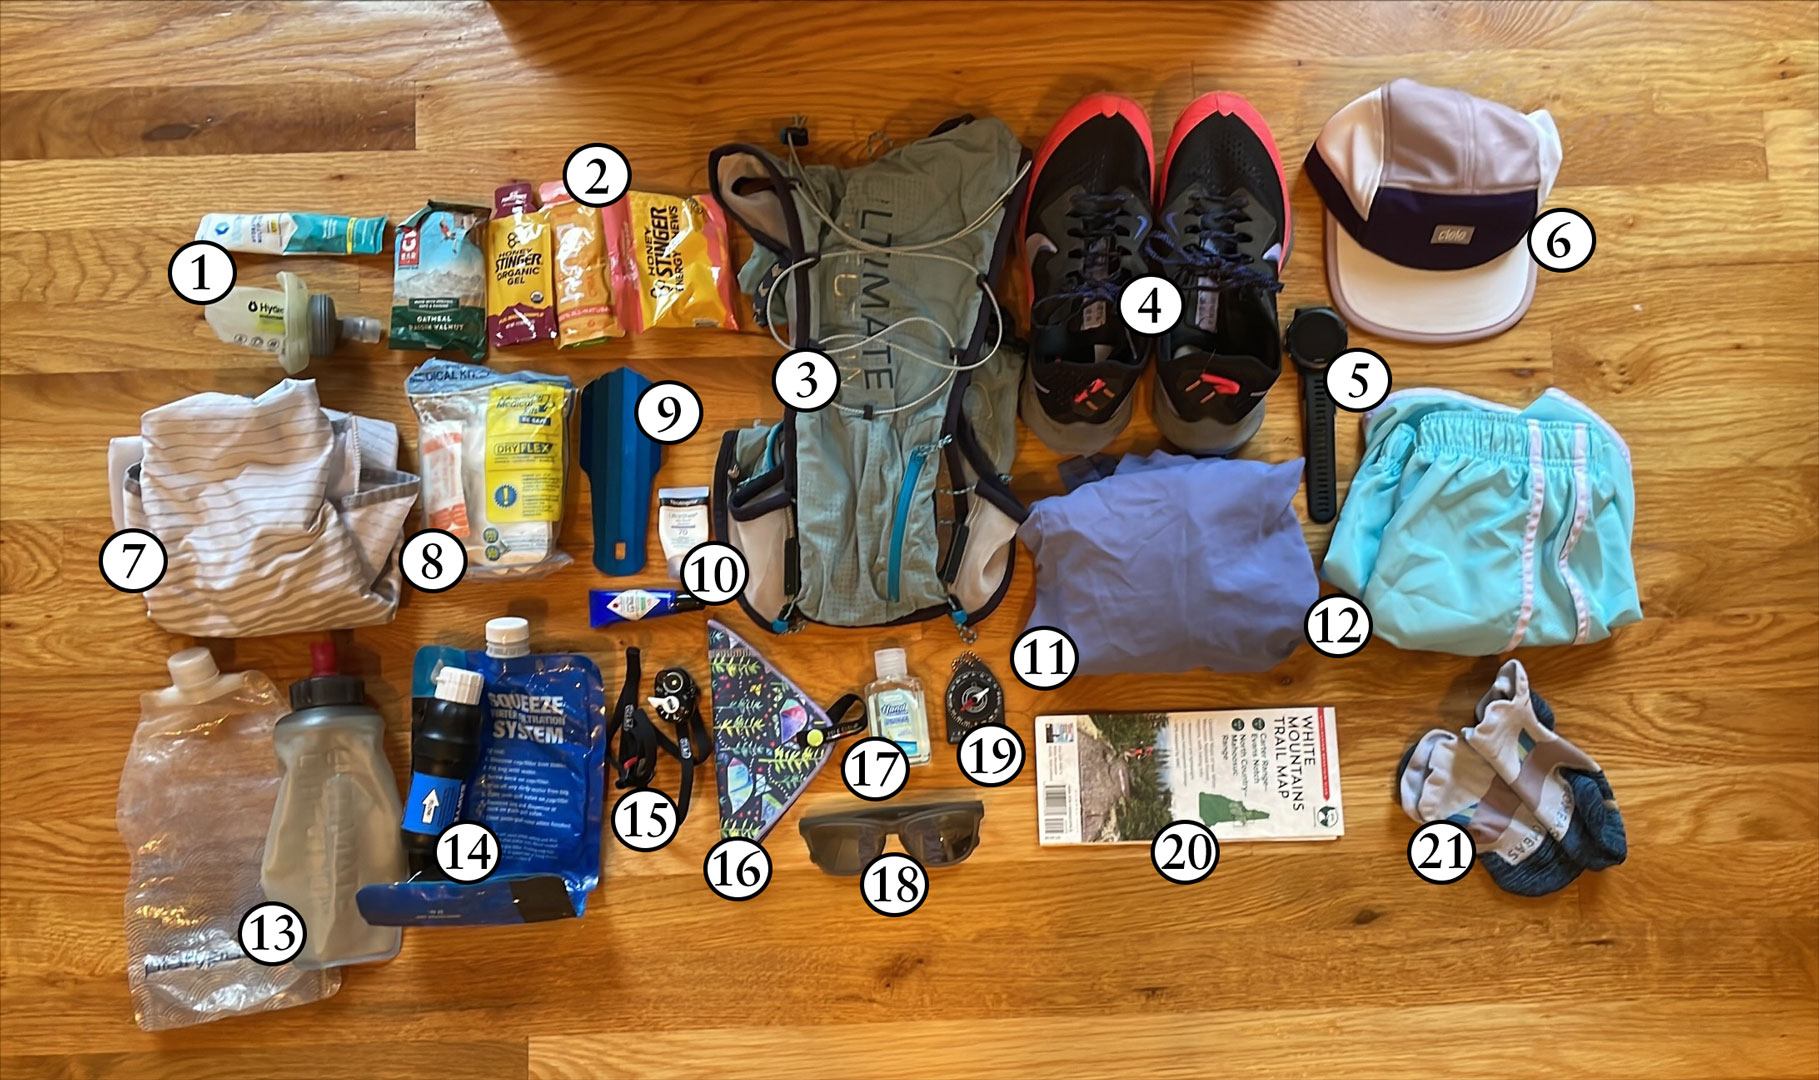 This is the Trail running gear I take with me on every trip.